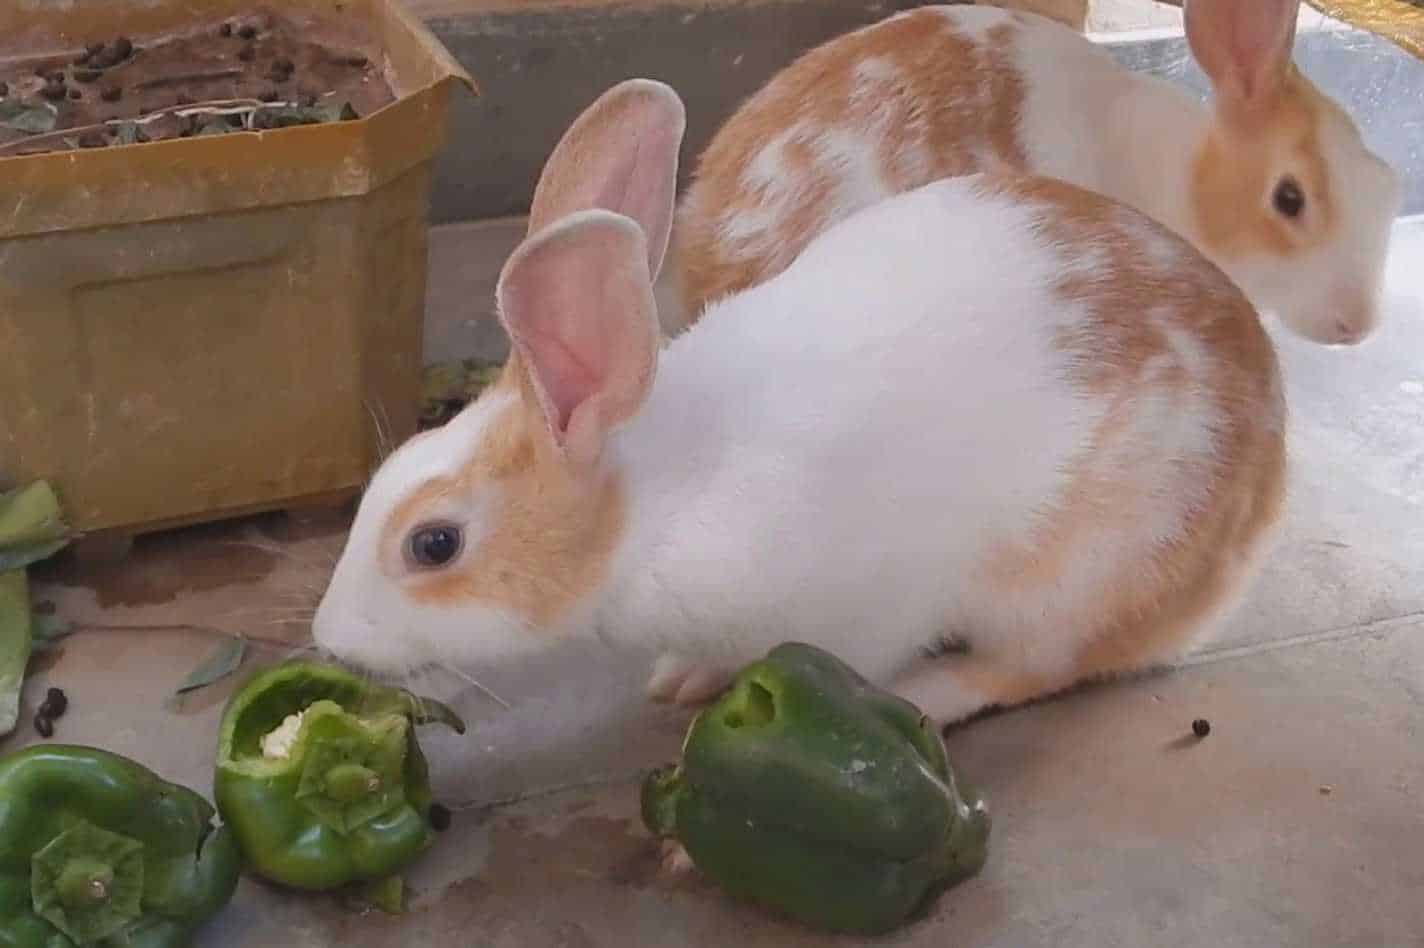 can rabbits eat bell peppers